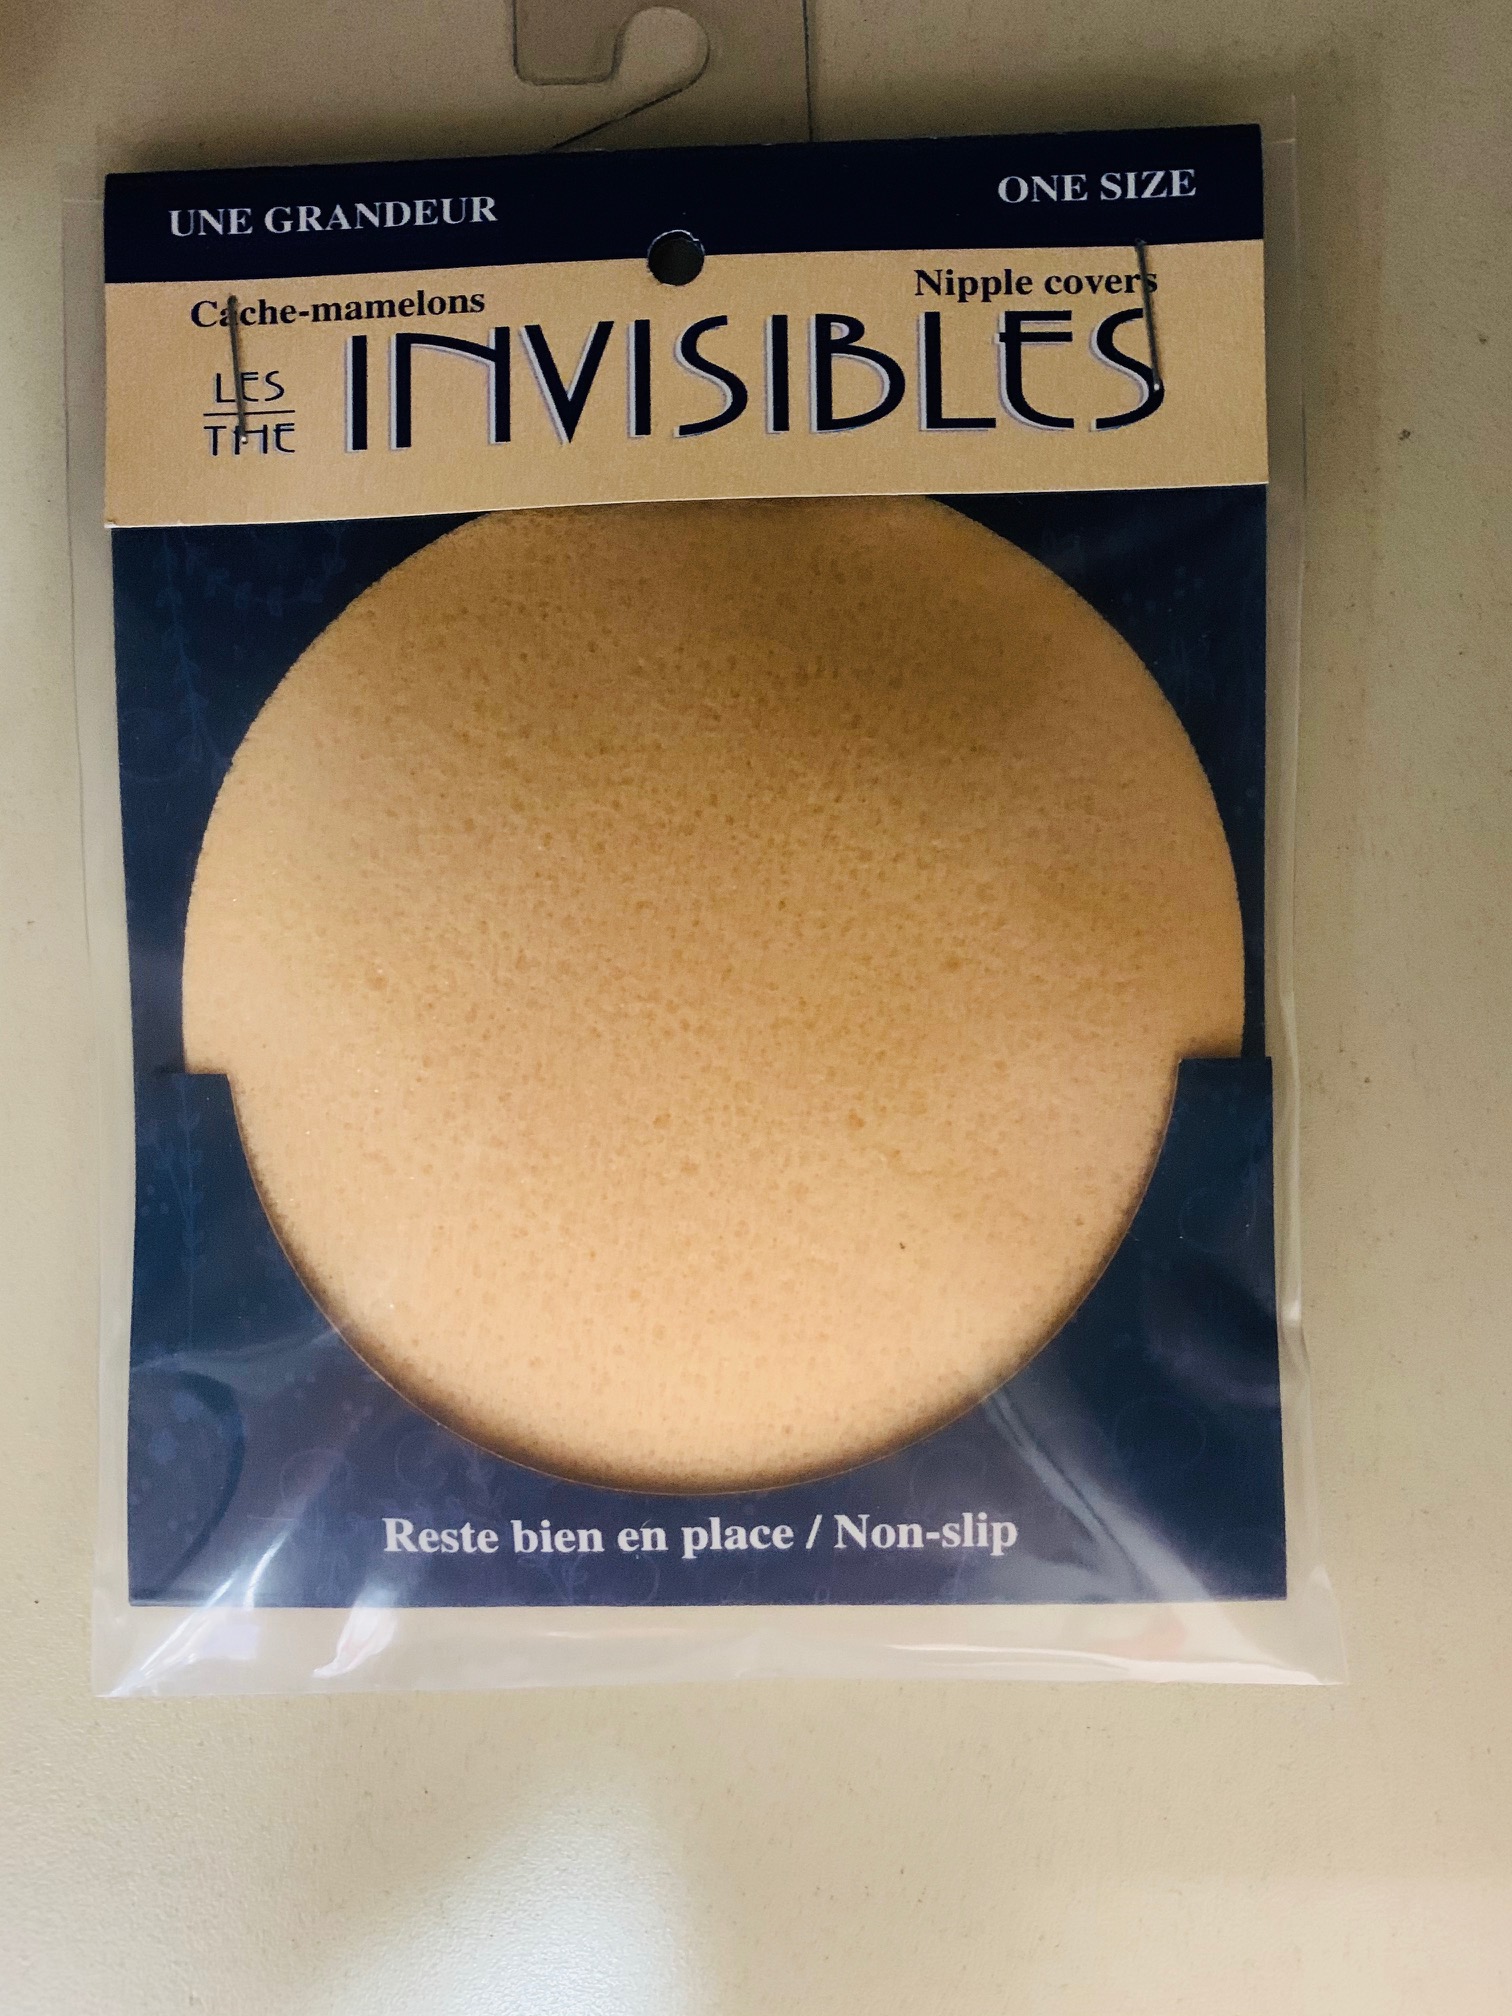 The Invisibles Foam Nipple Covers 74404 